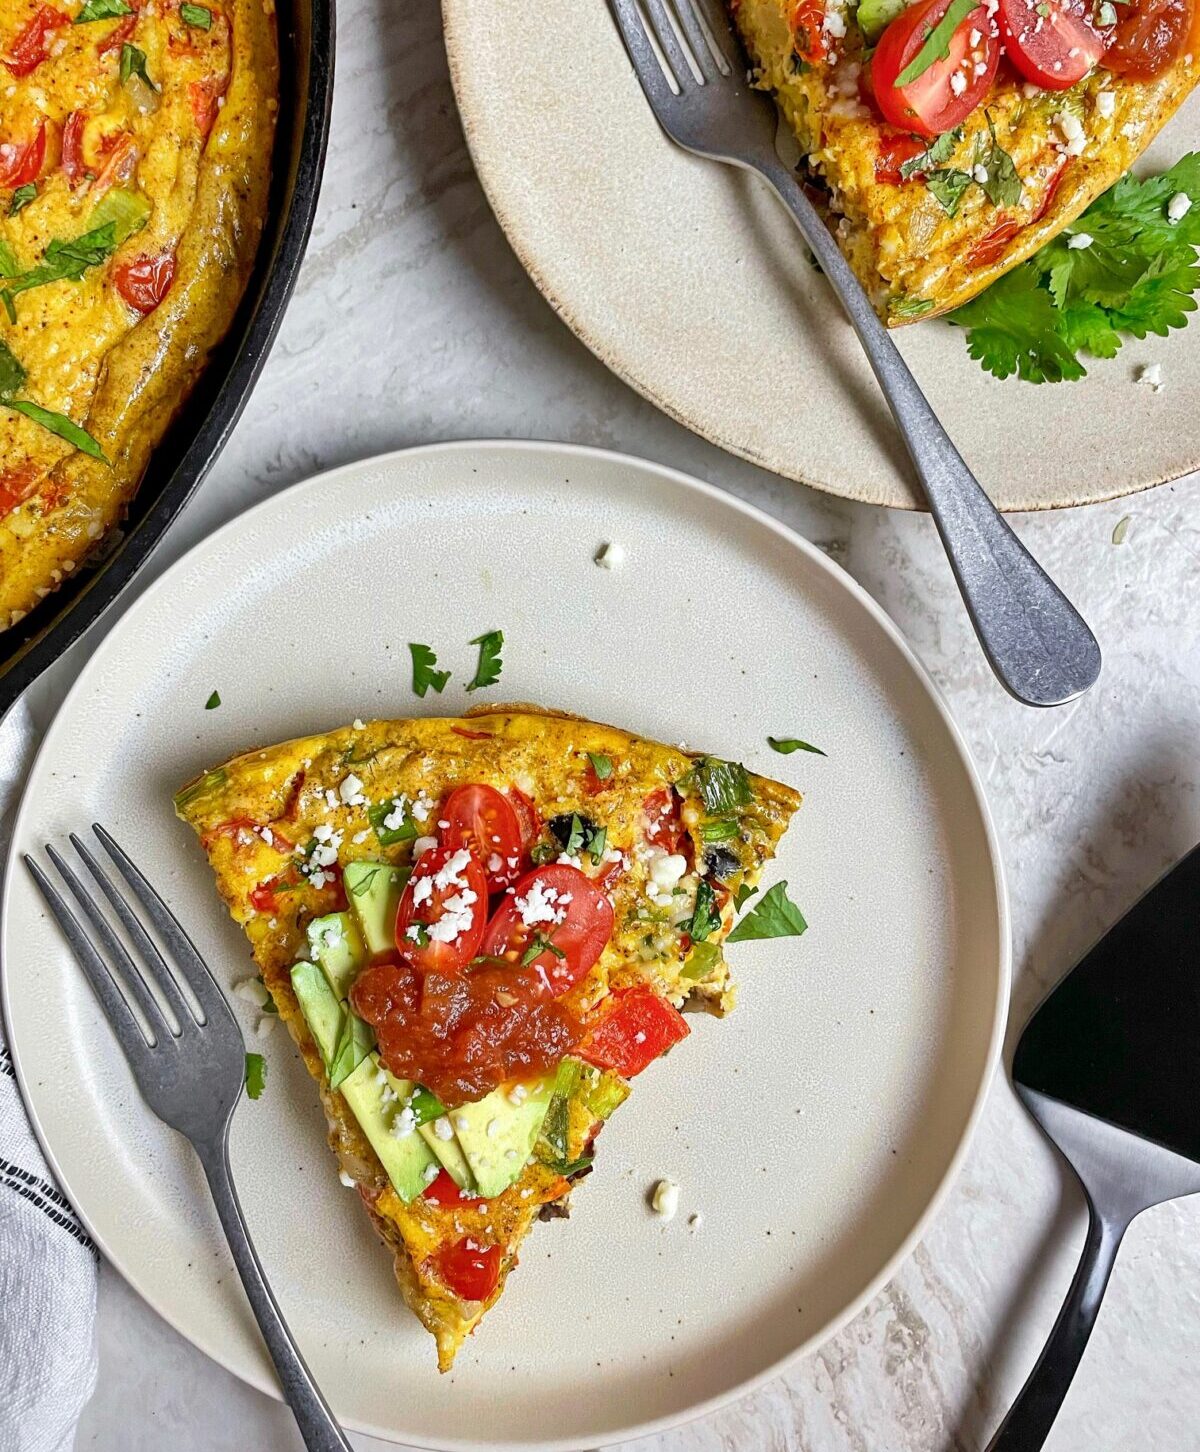 two slices of frittata on plates with the pan of frittata to the left